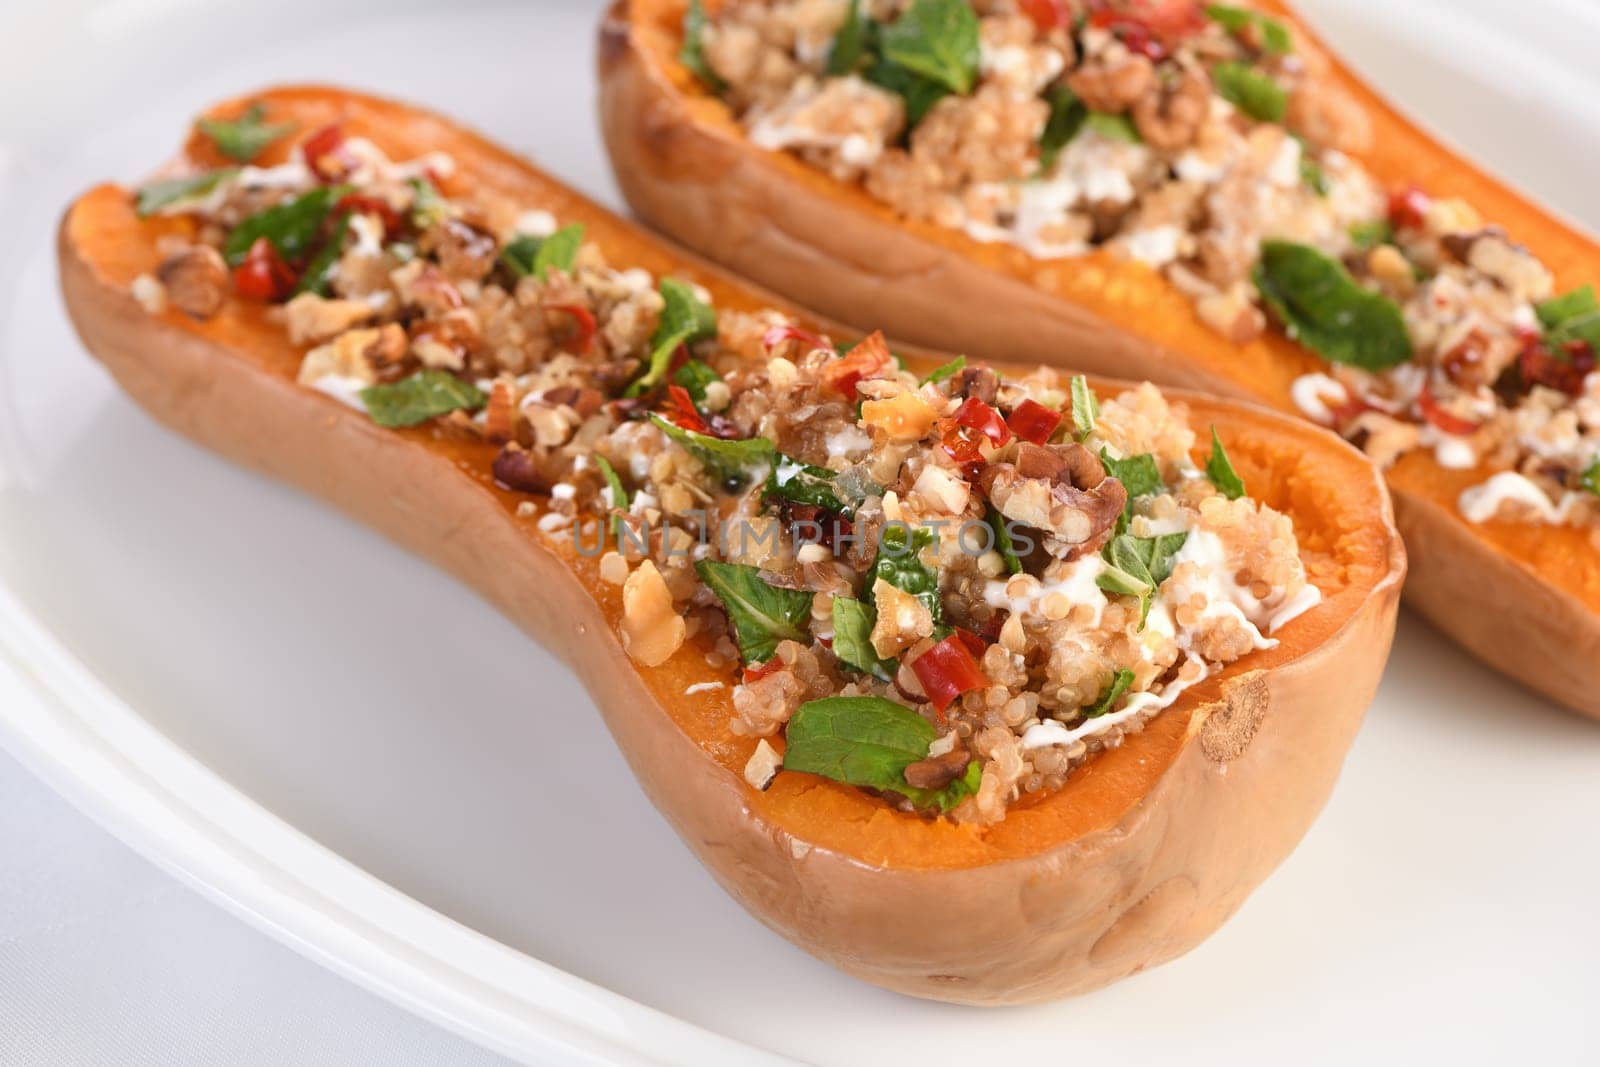 Baked stuffed pumpkin filled with walnuts, fresh mint and chili with quinoa tabbouleh. The maple syrup makes them excellent. It is a healthy side dish or main dish for vegans and paleo.